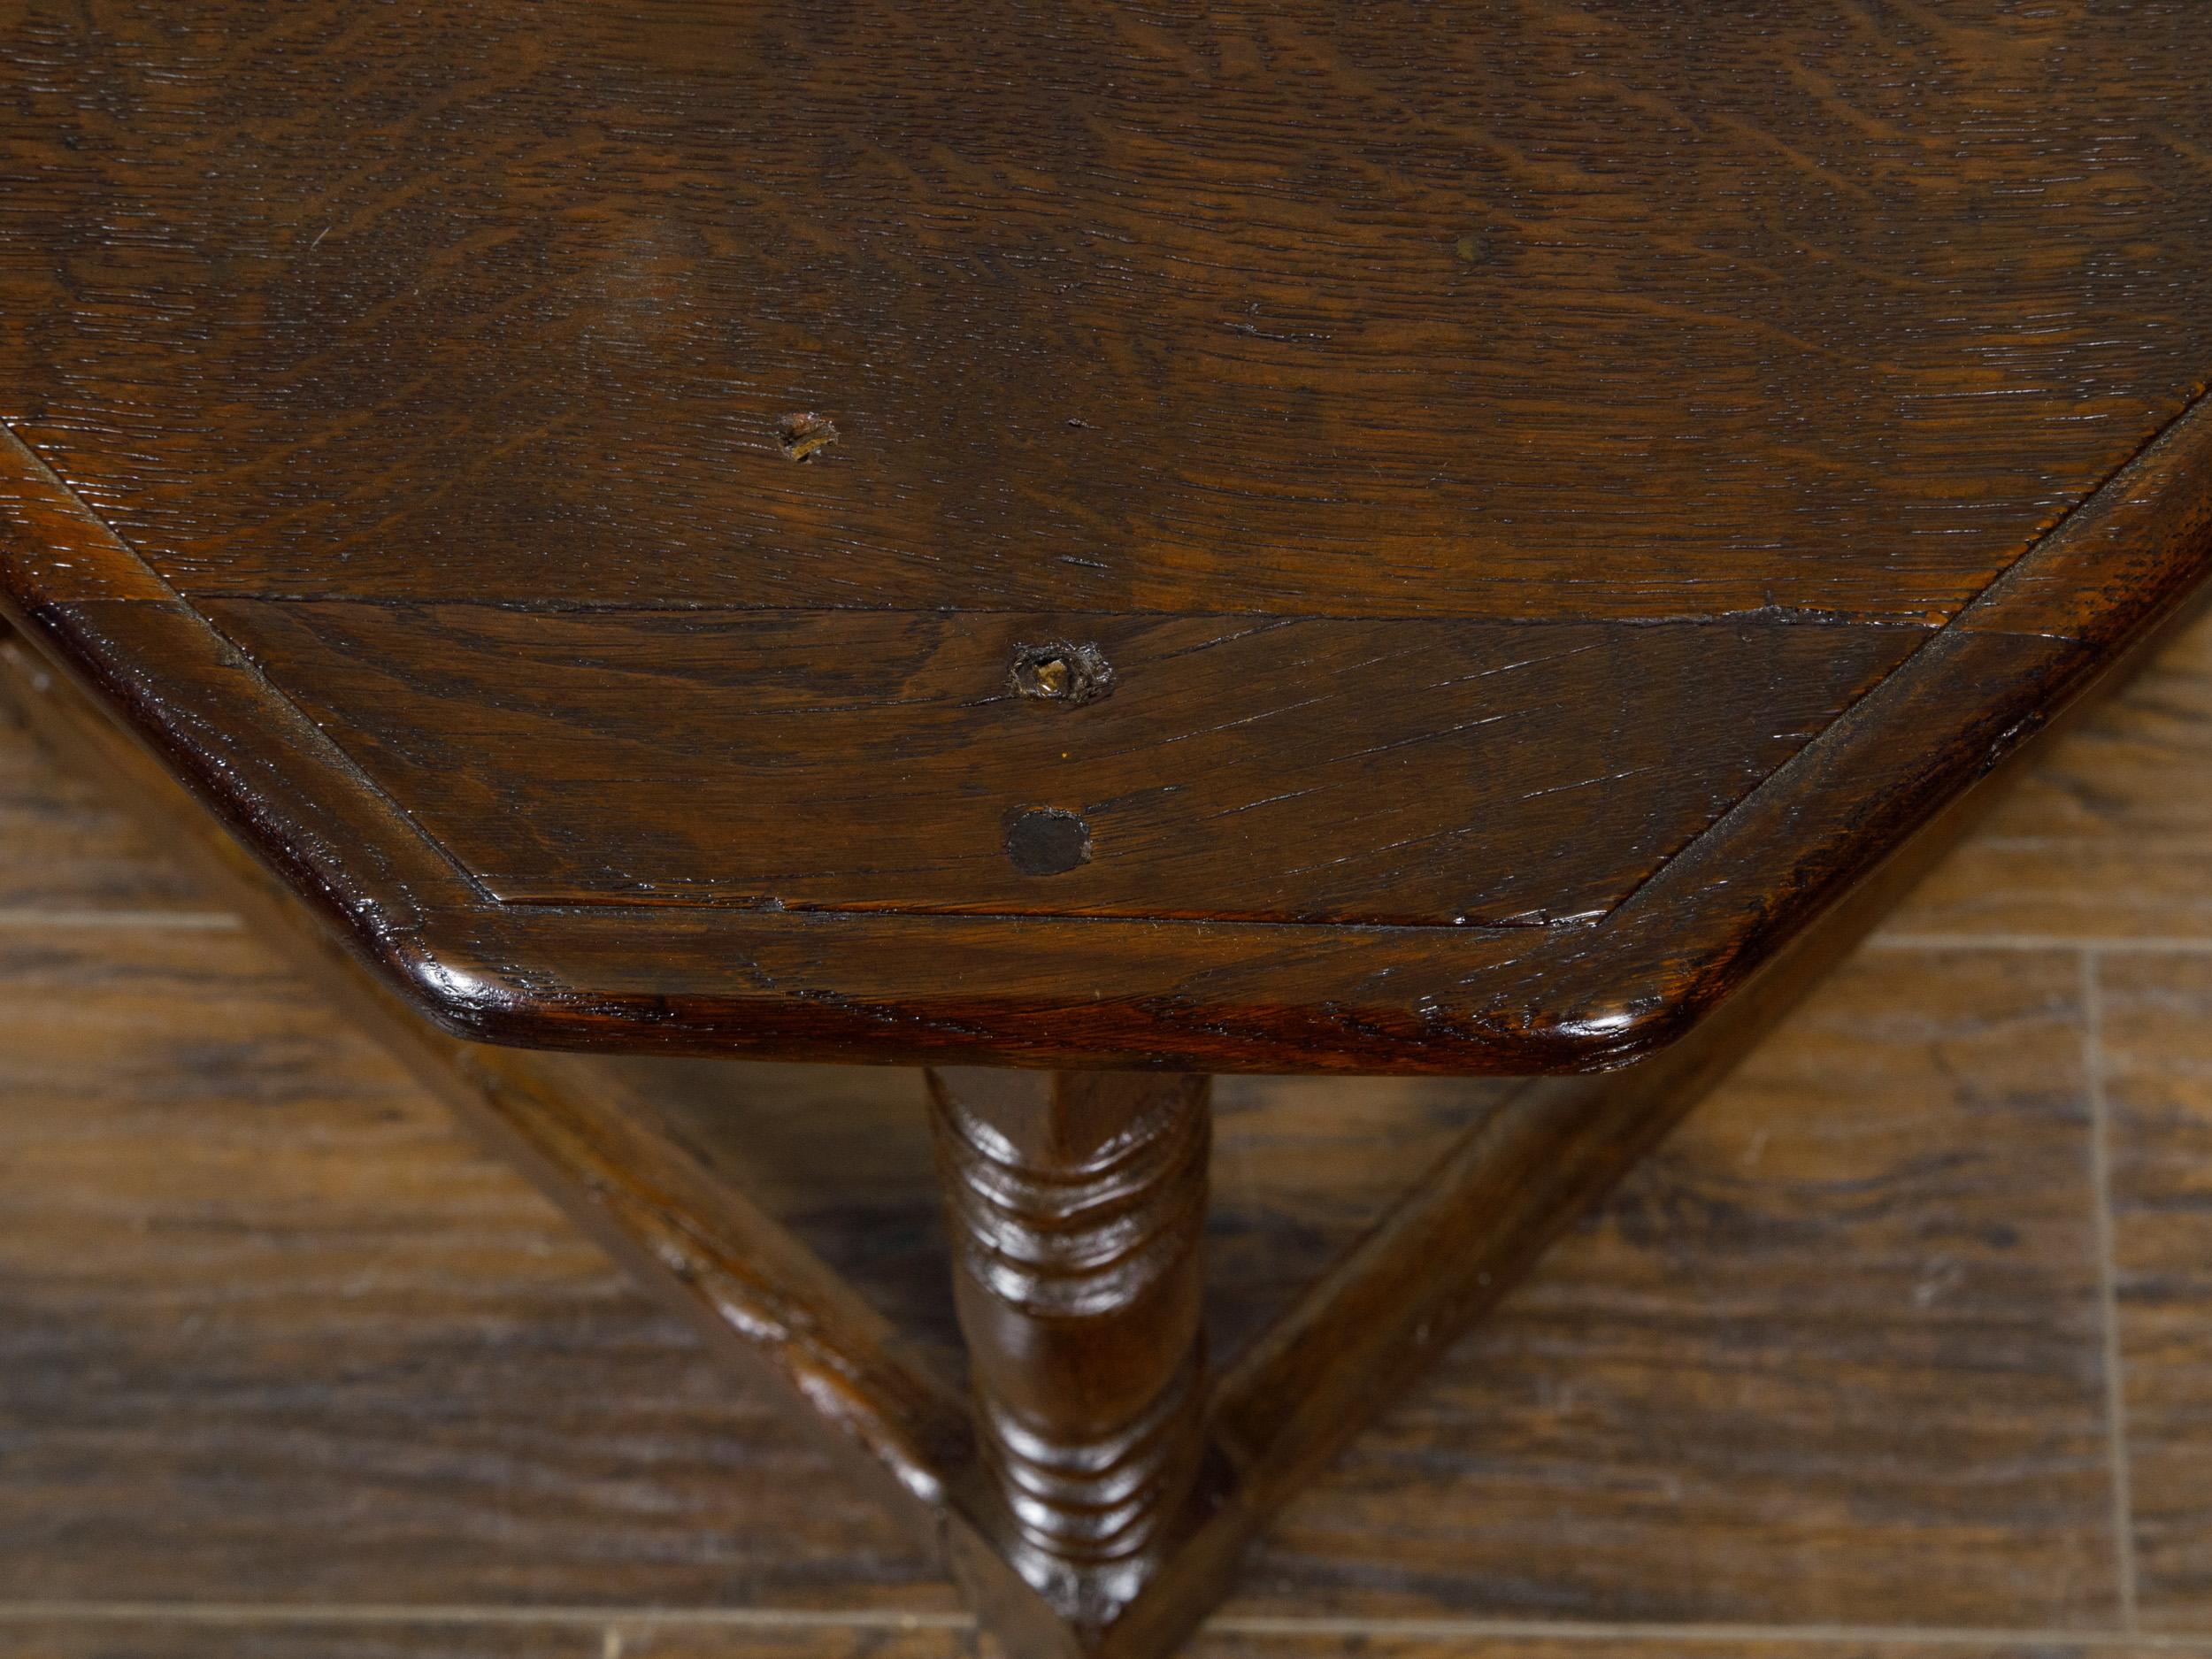 English 19th Century Dark Oak Triangular Demilune Table with Turned Legs For Sale 7